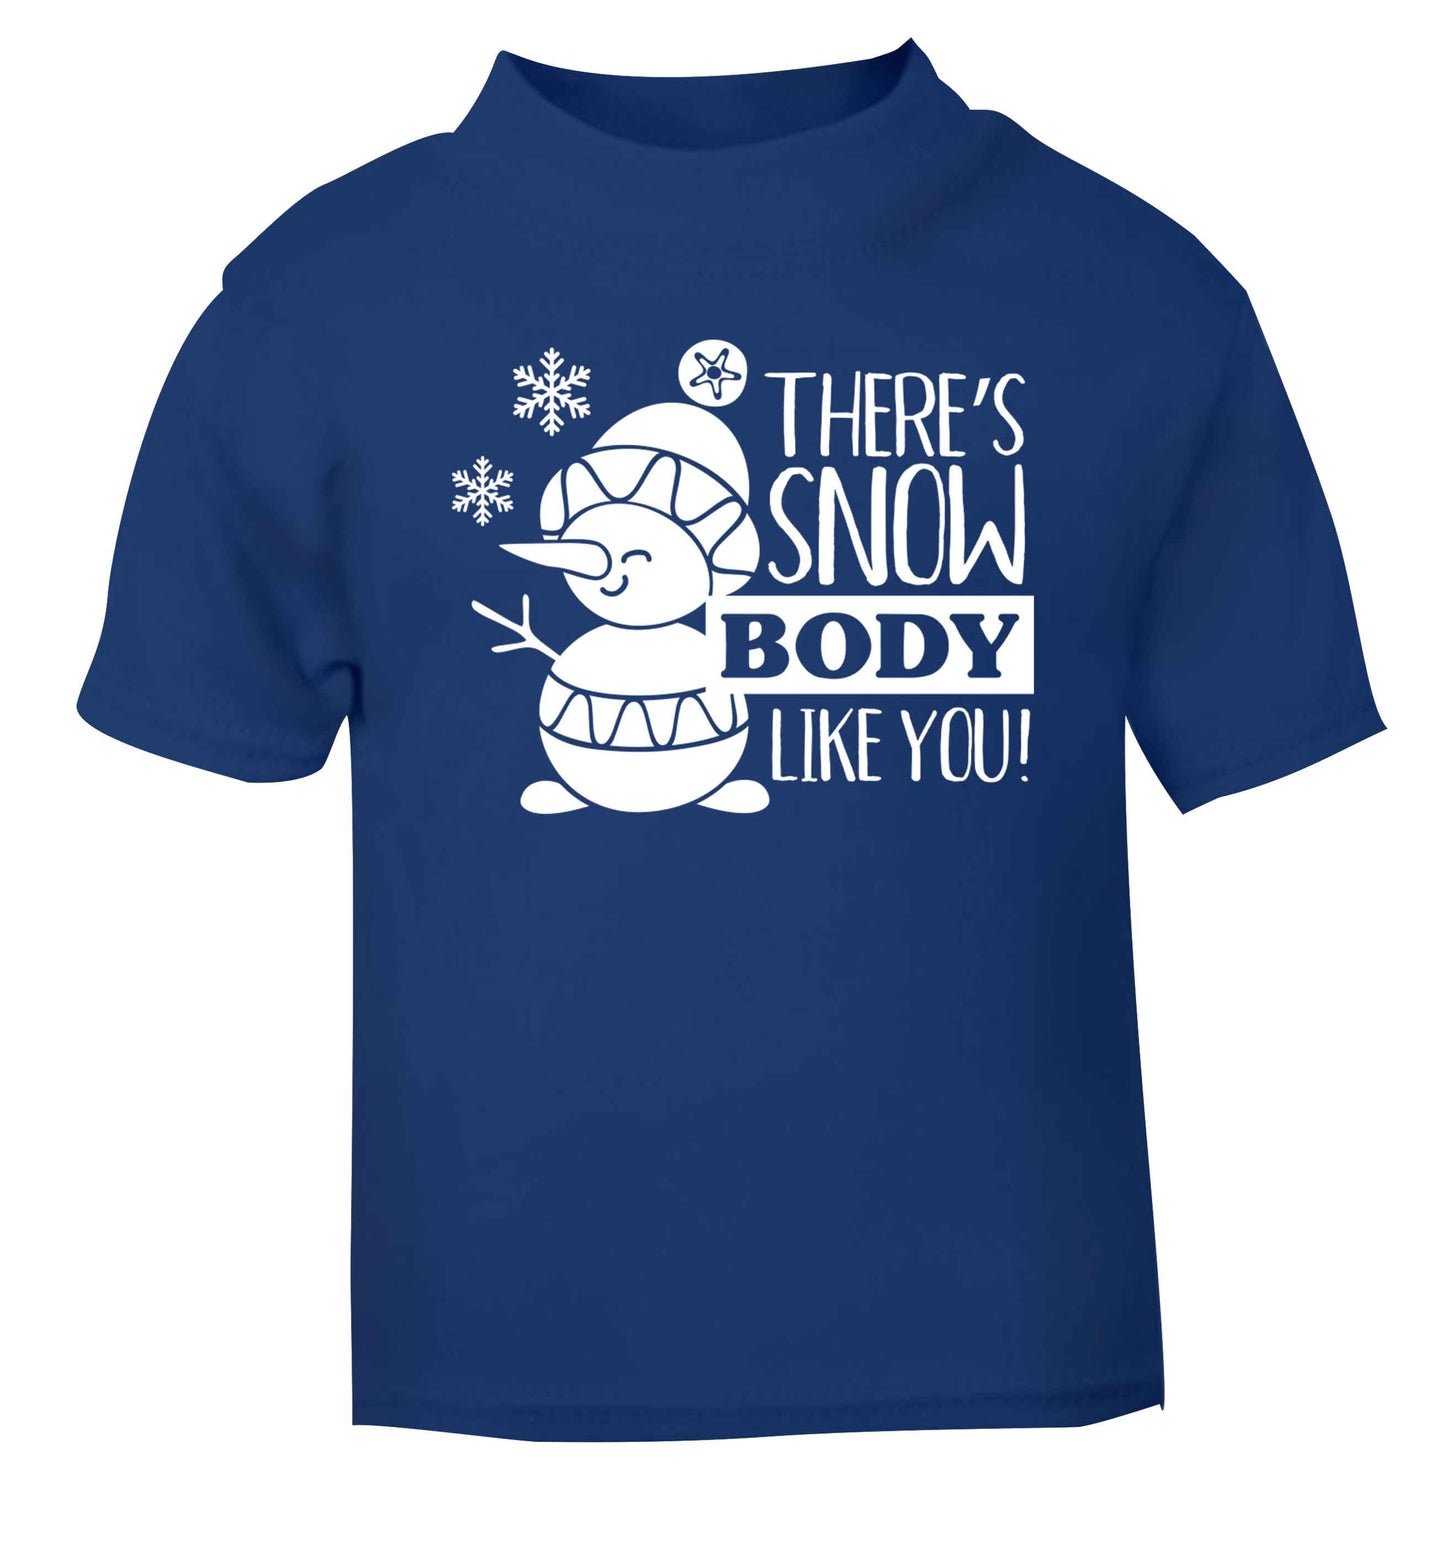 There's snow body like you blue baby toddler Tshirt 2 Years